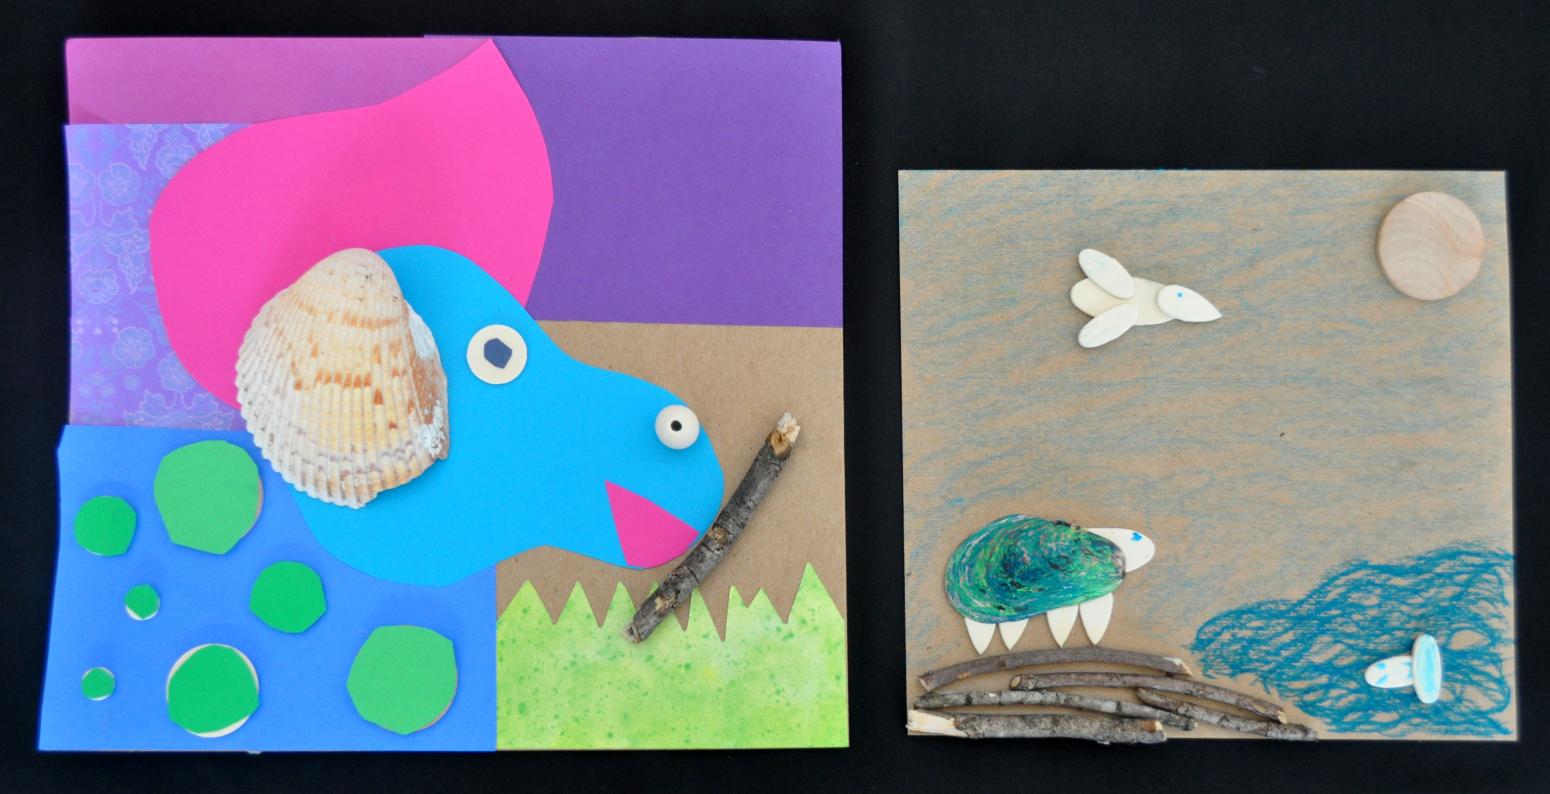 Two mixed media collages of animals made out of paper, wood, and shells.